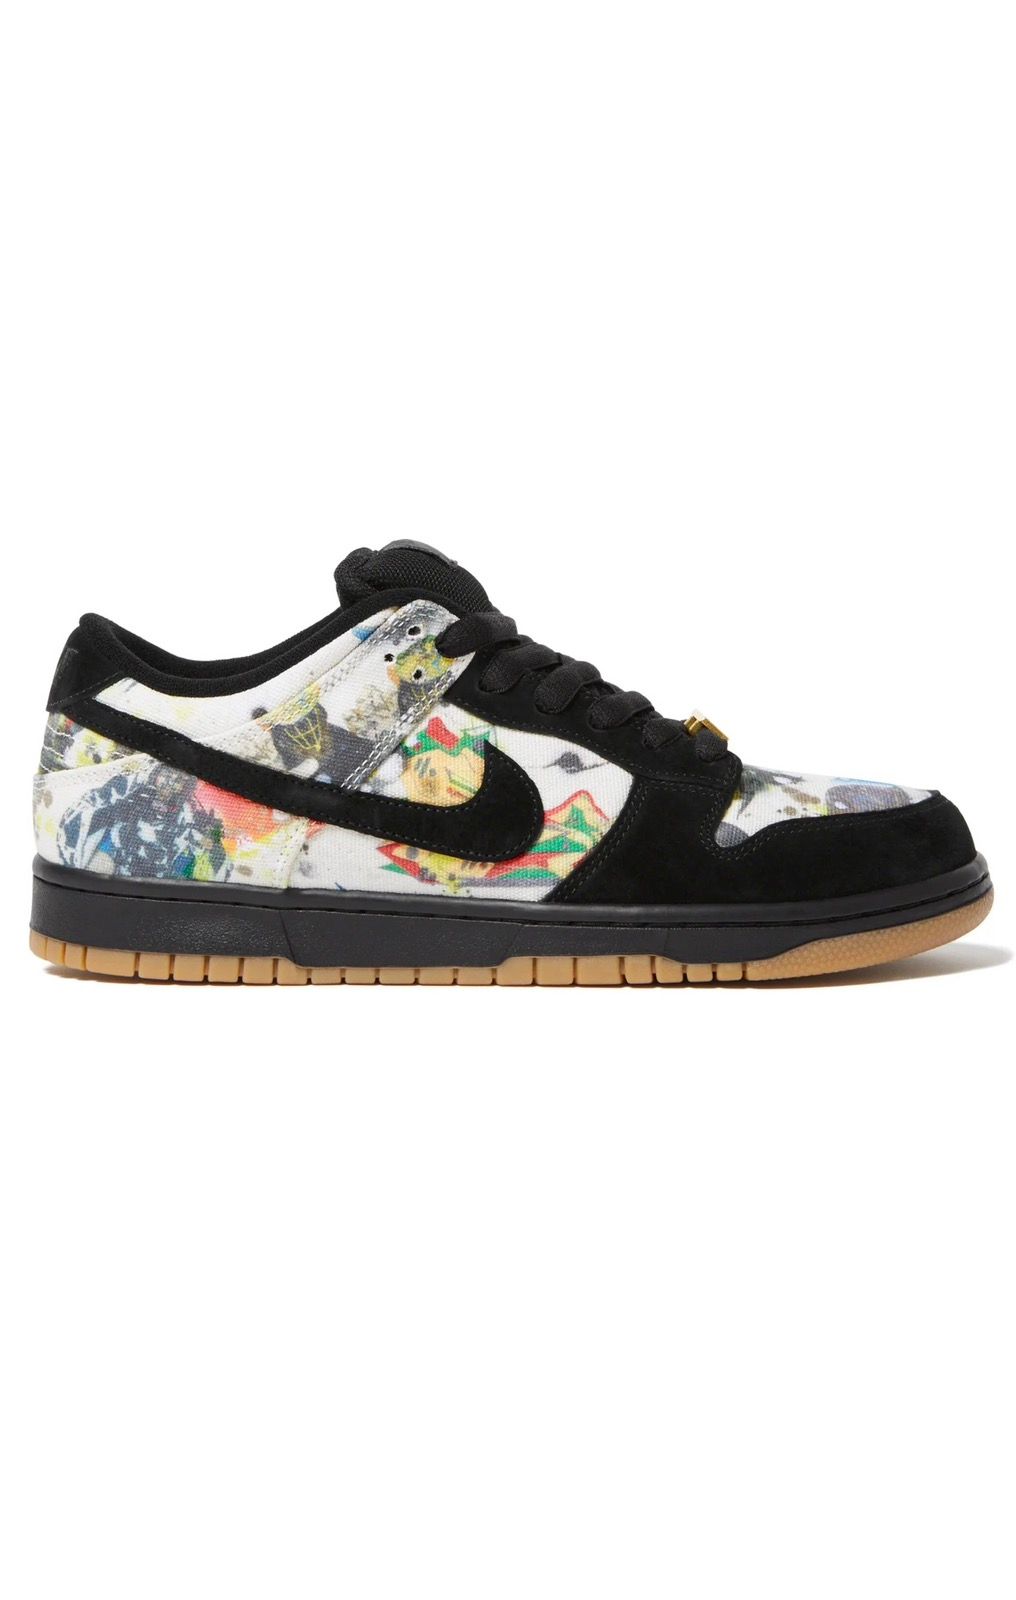 Pre-owned Nike X Supreme Nike Sb Dunk Low Rammellzee Shoes In Black